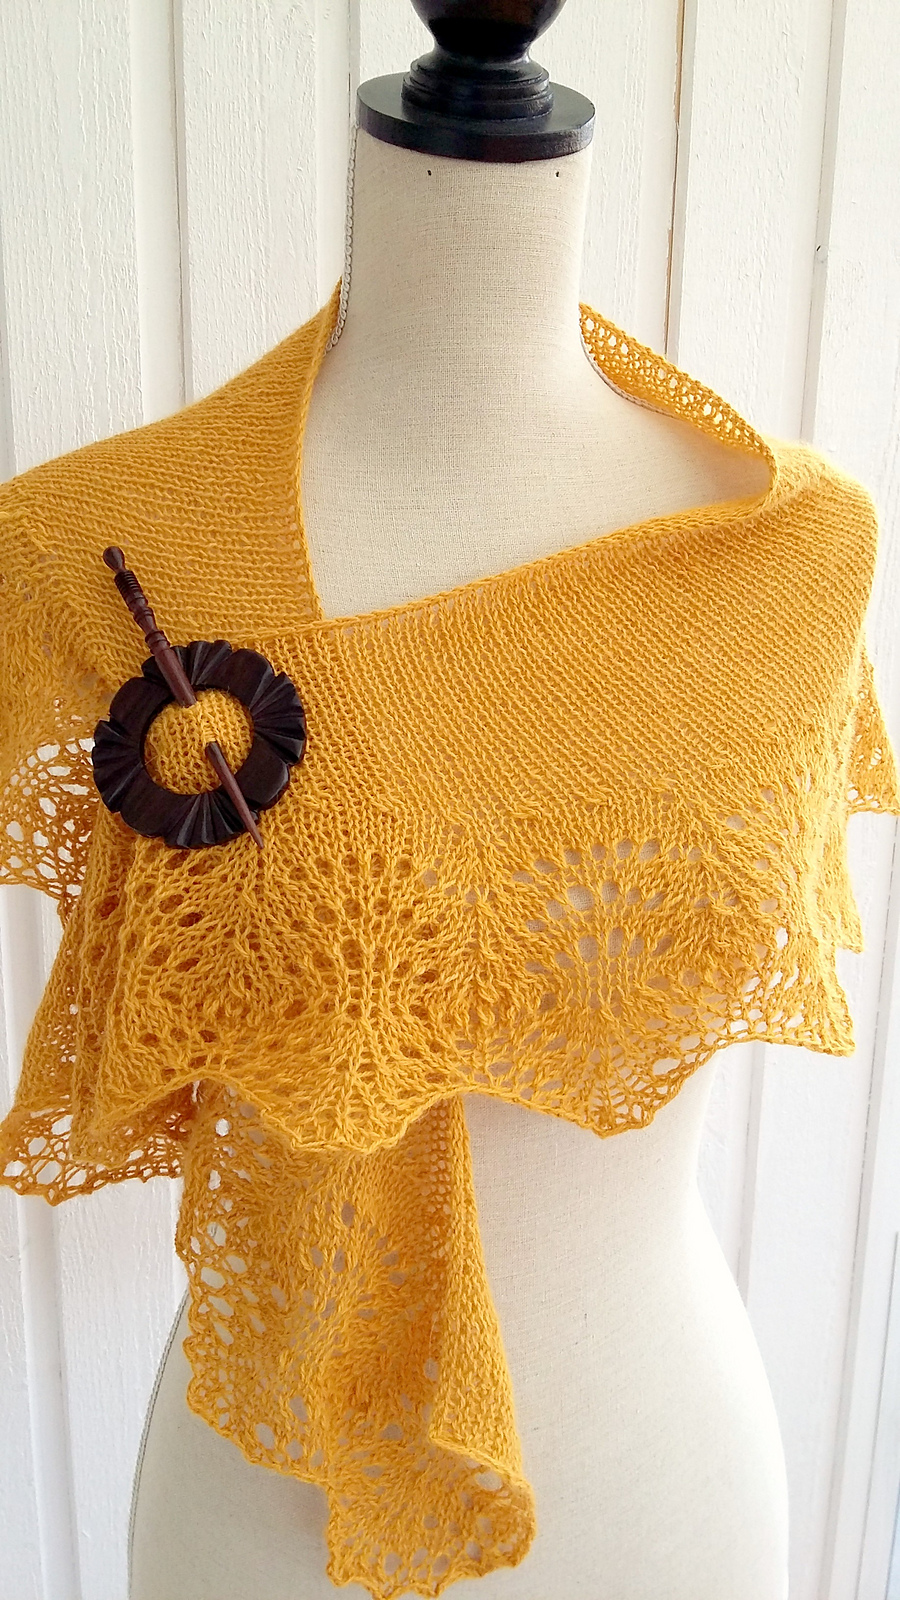 Decorative Edge Shawl and Scarf Knitting Patterns | In the ...